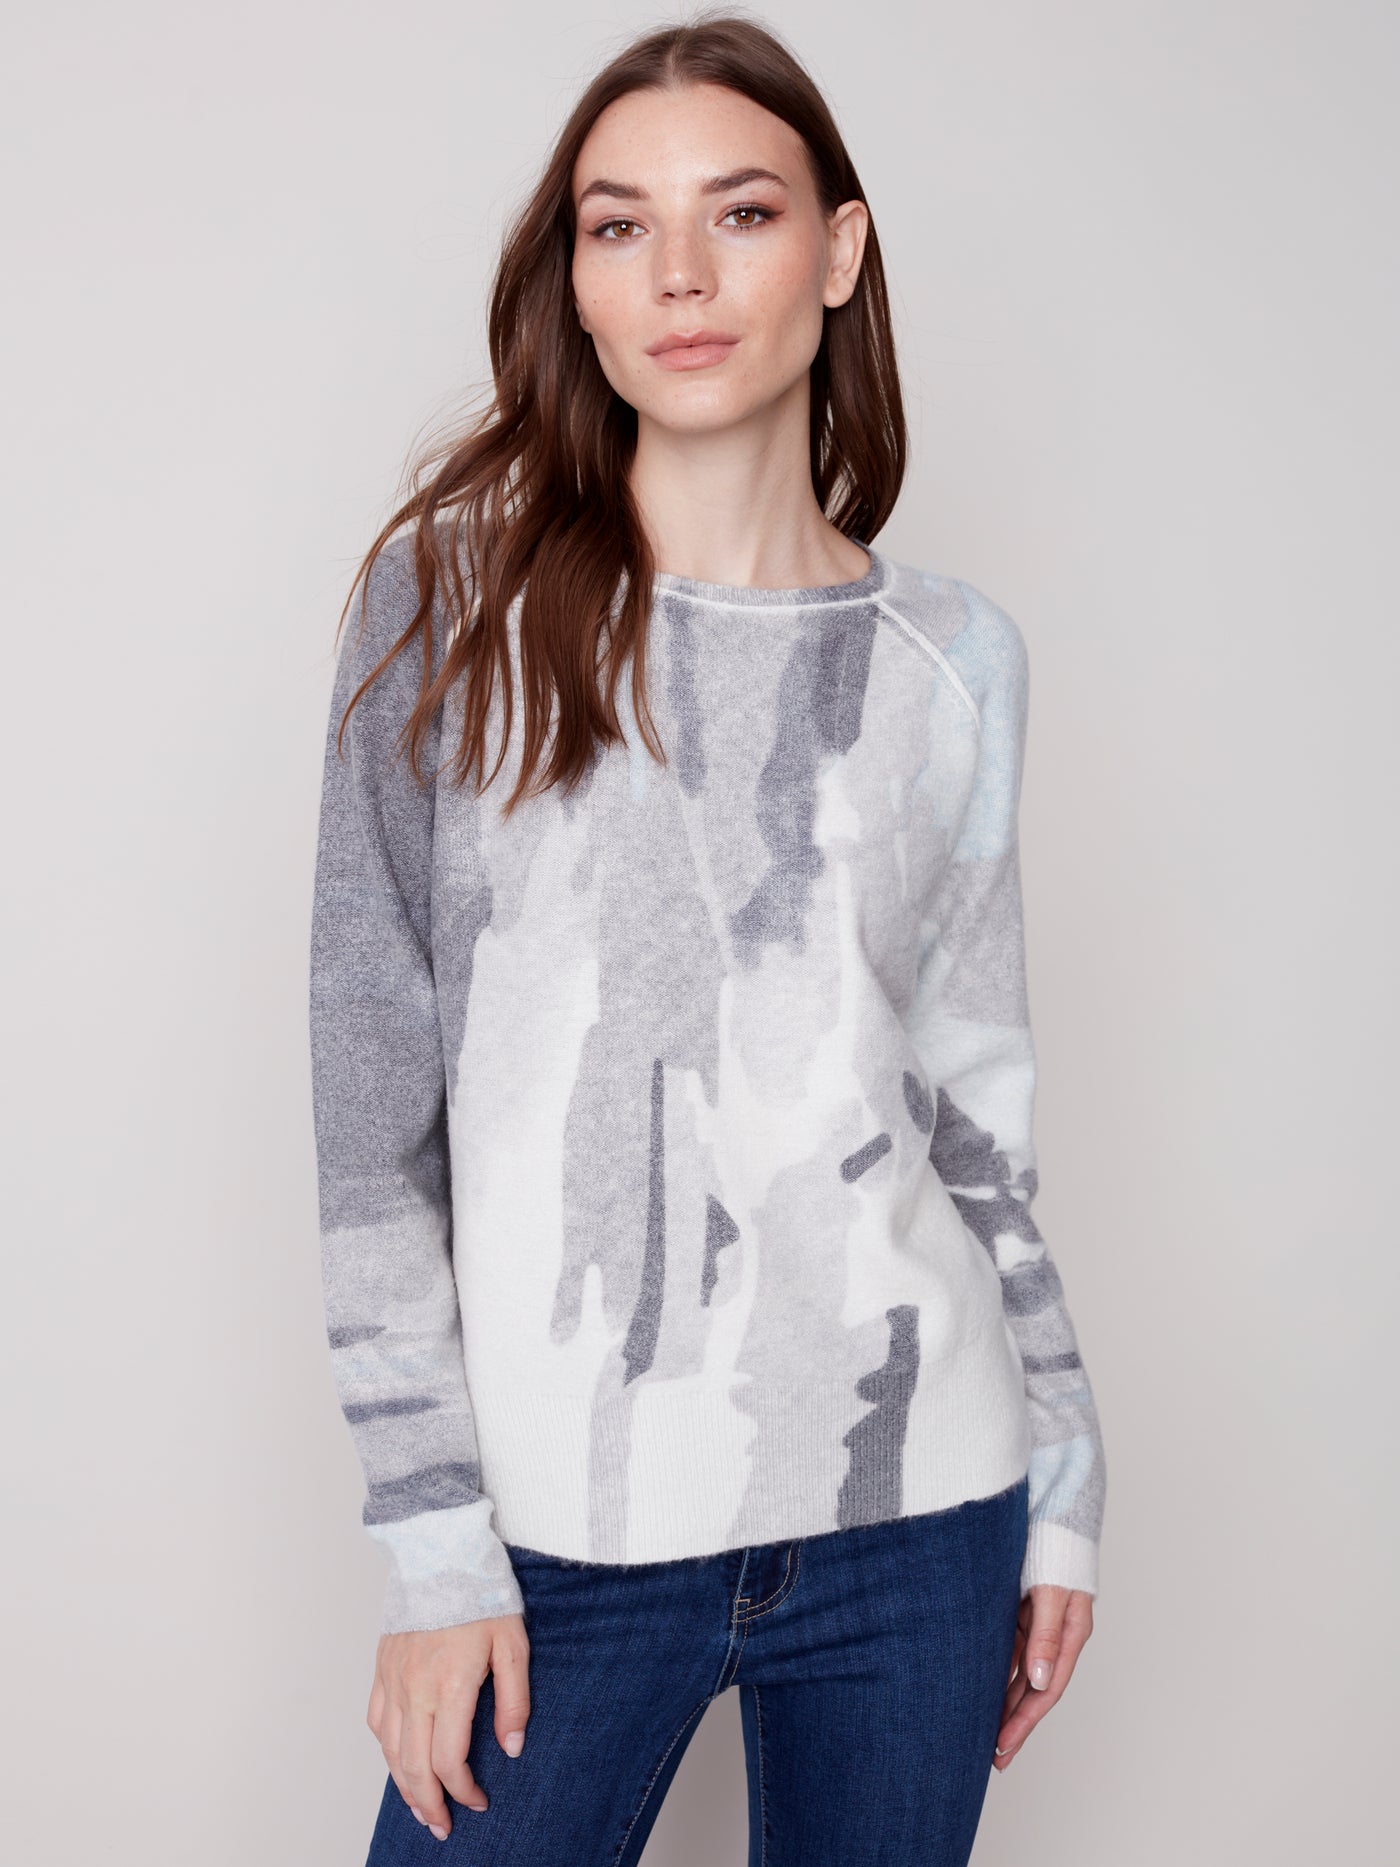 Charlie B Top - Reversible Sweater - Charcoal